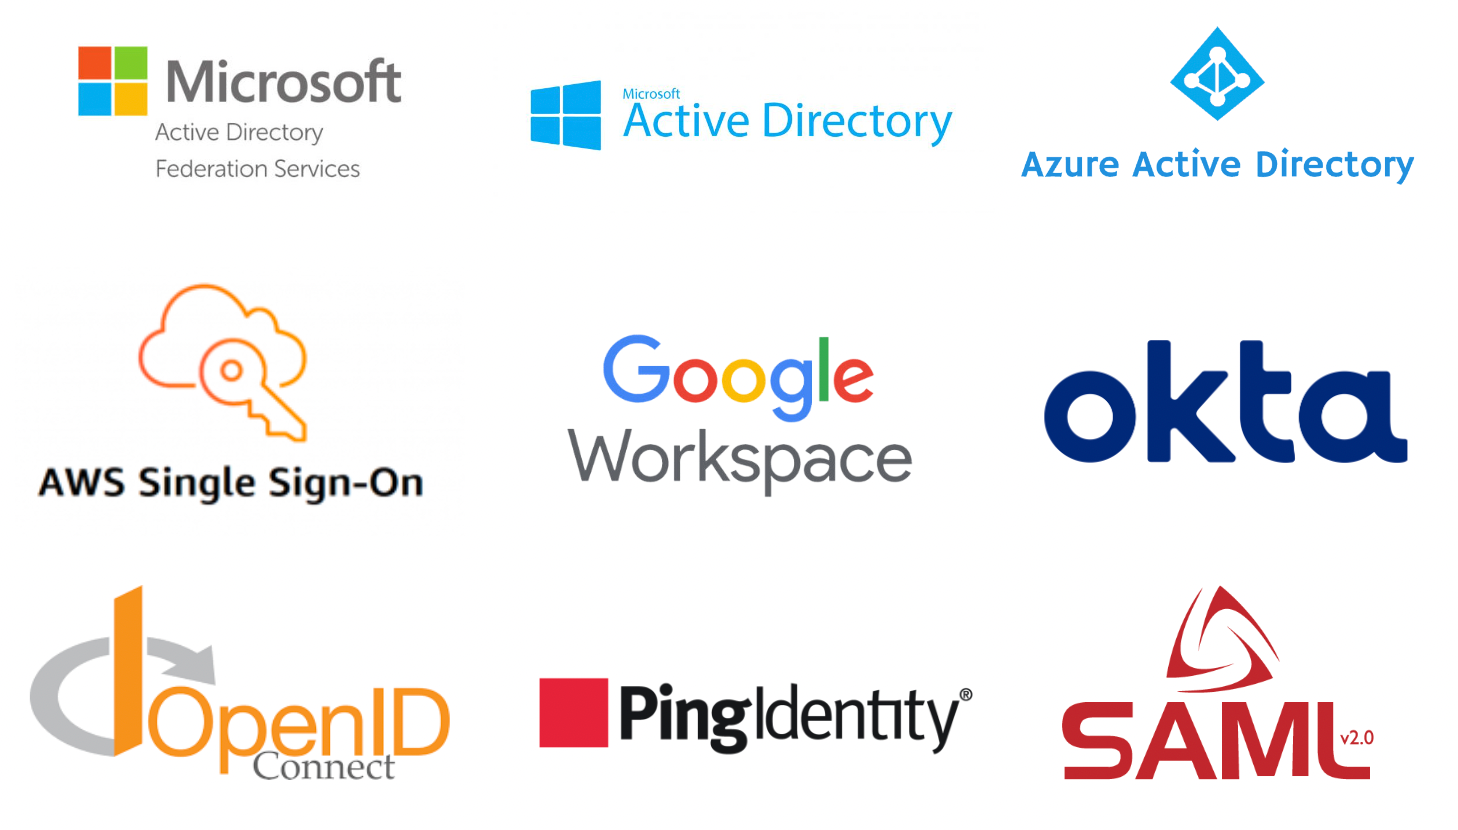 Microsoft ADFS, Microsoft Active Directory, Azure Active Directory, AWS Single Sign-on, Google Workspace, Okta, OpenID Connect, Ping Identity, SAML